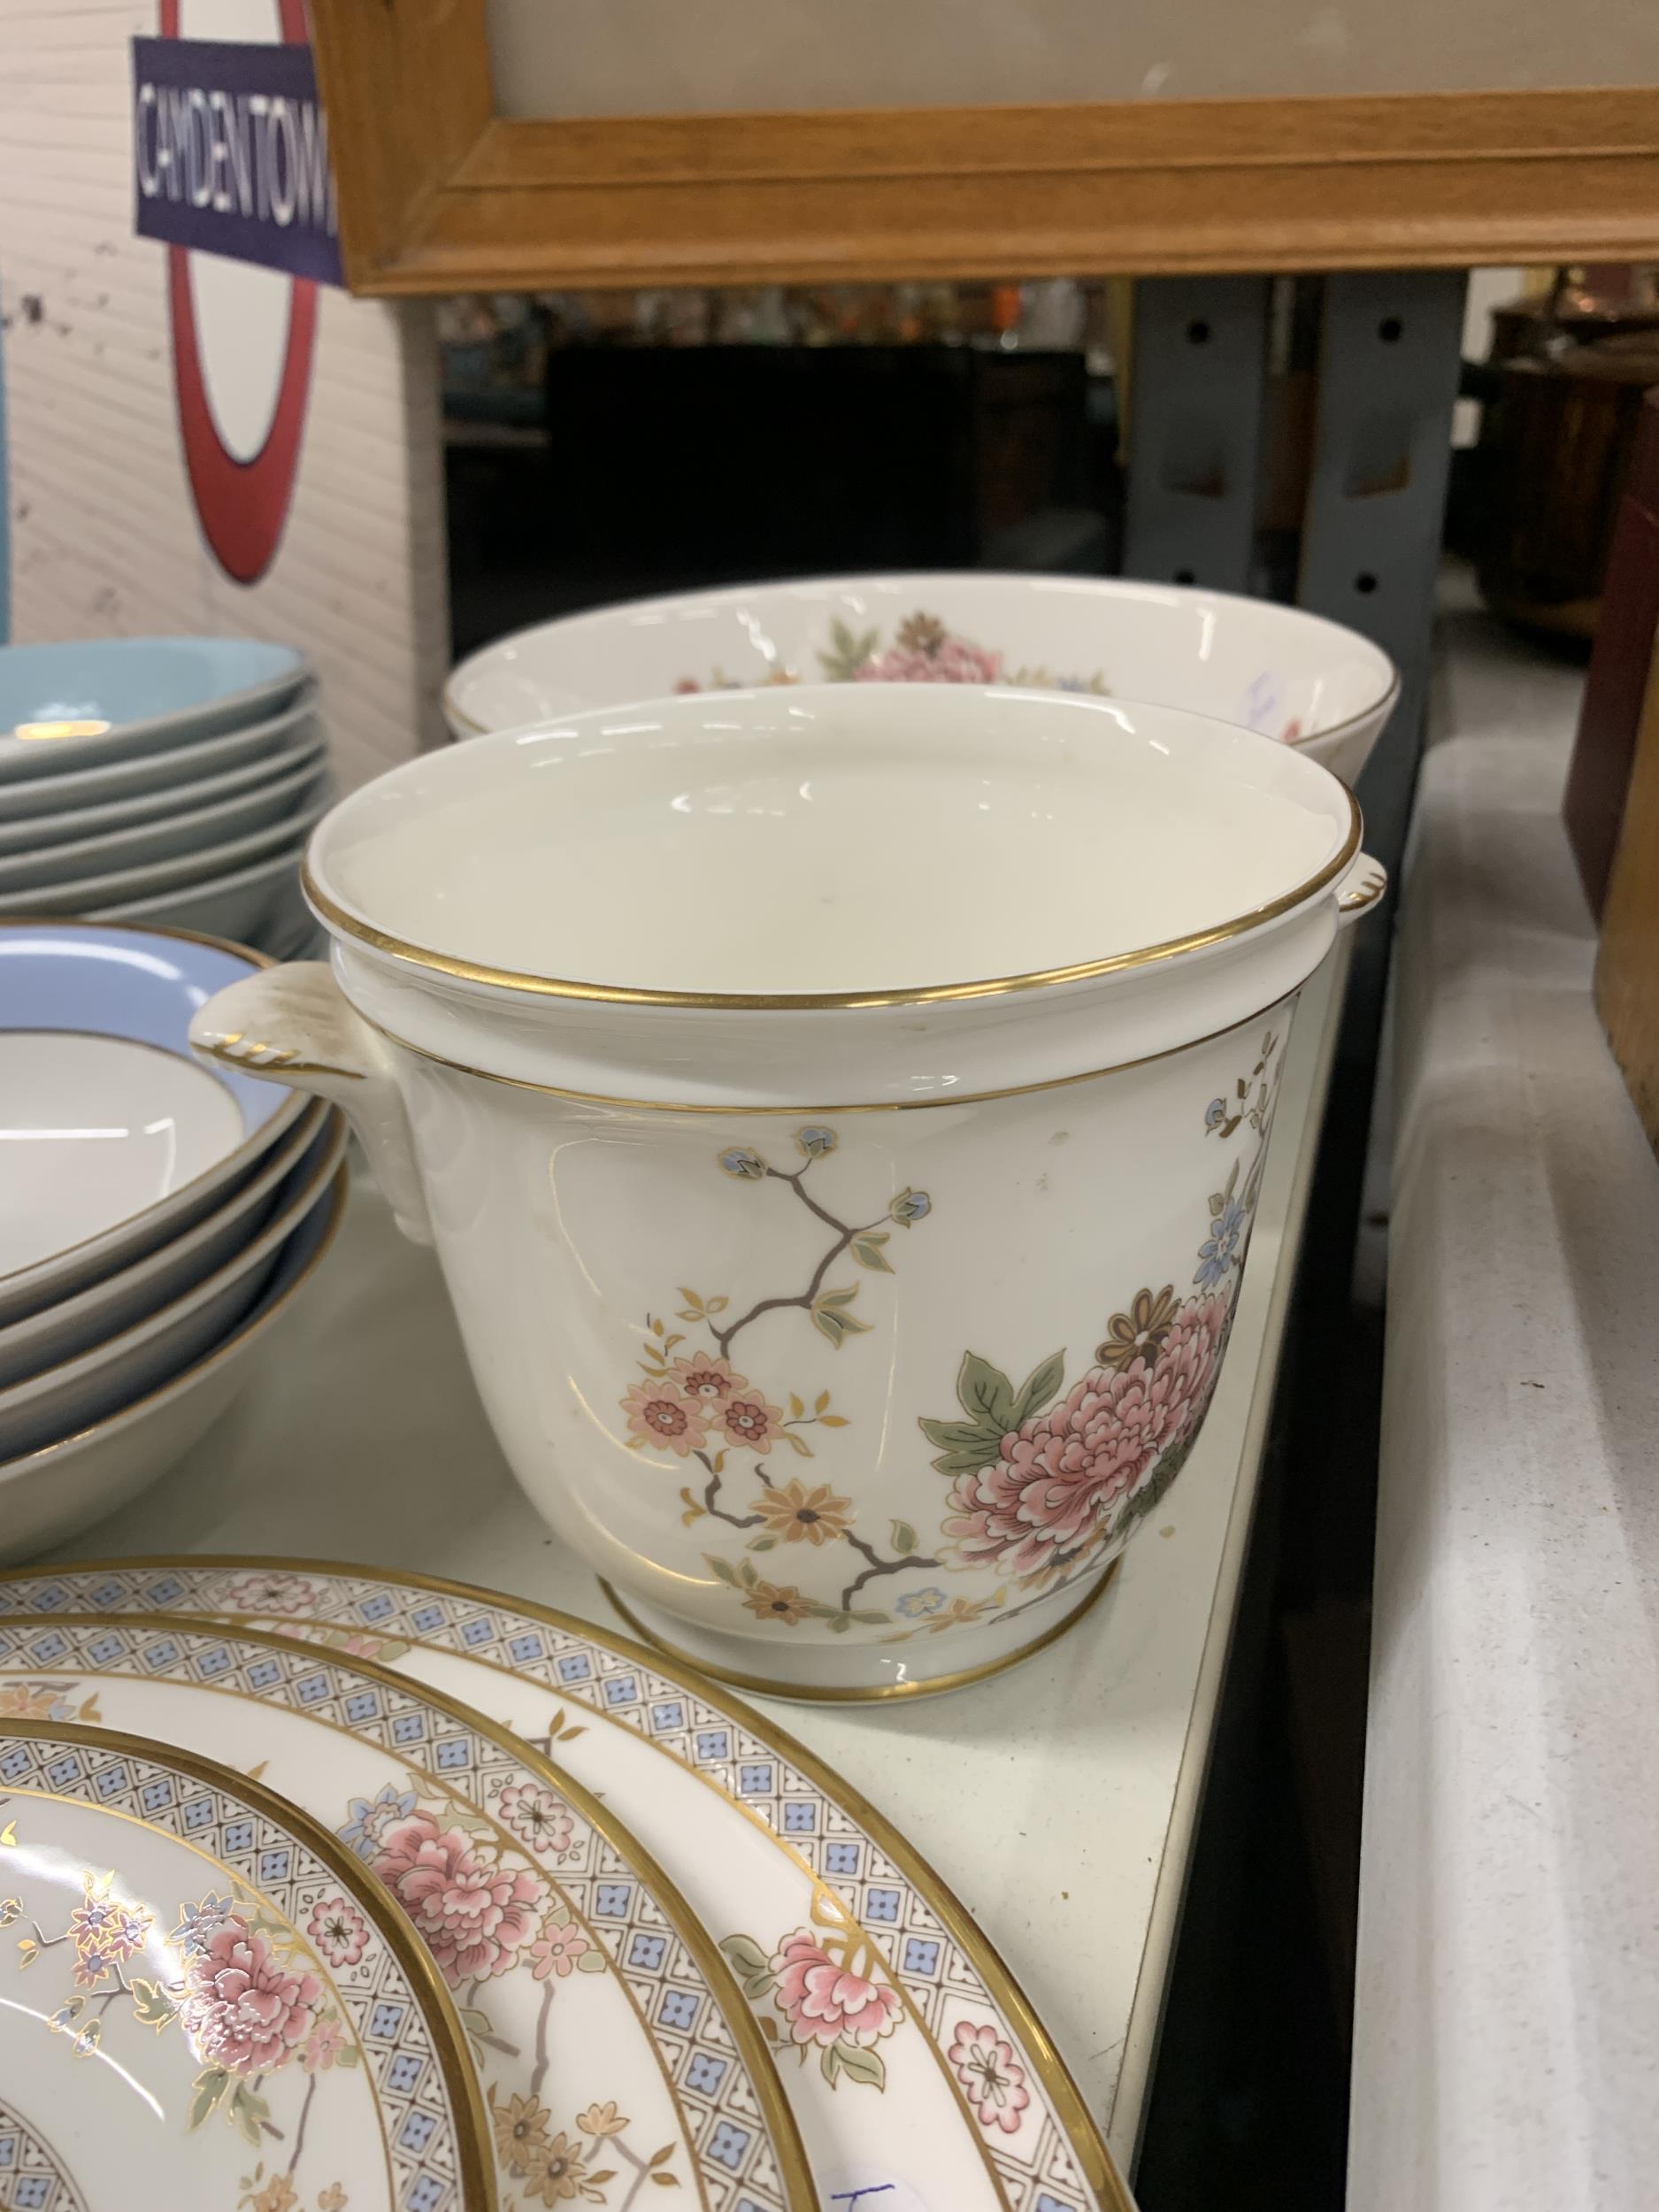 A QUANTITY OF ROYAL DOULTON TEAWARE TO INCLUDE 'CANTON', PLATES, A LARGE BOWL, PLANTER LIDDED - Image 7 of 7